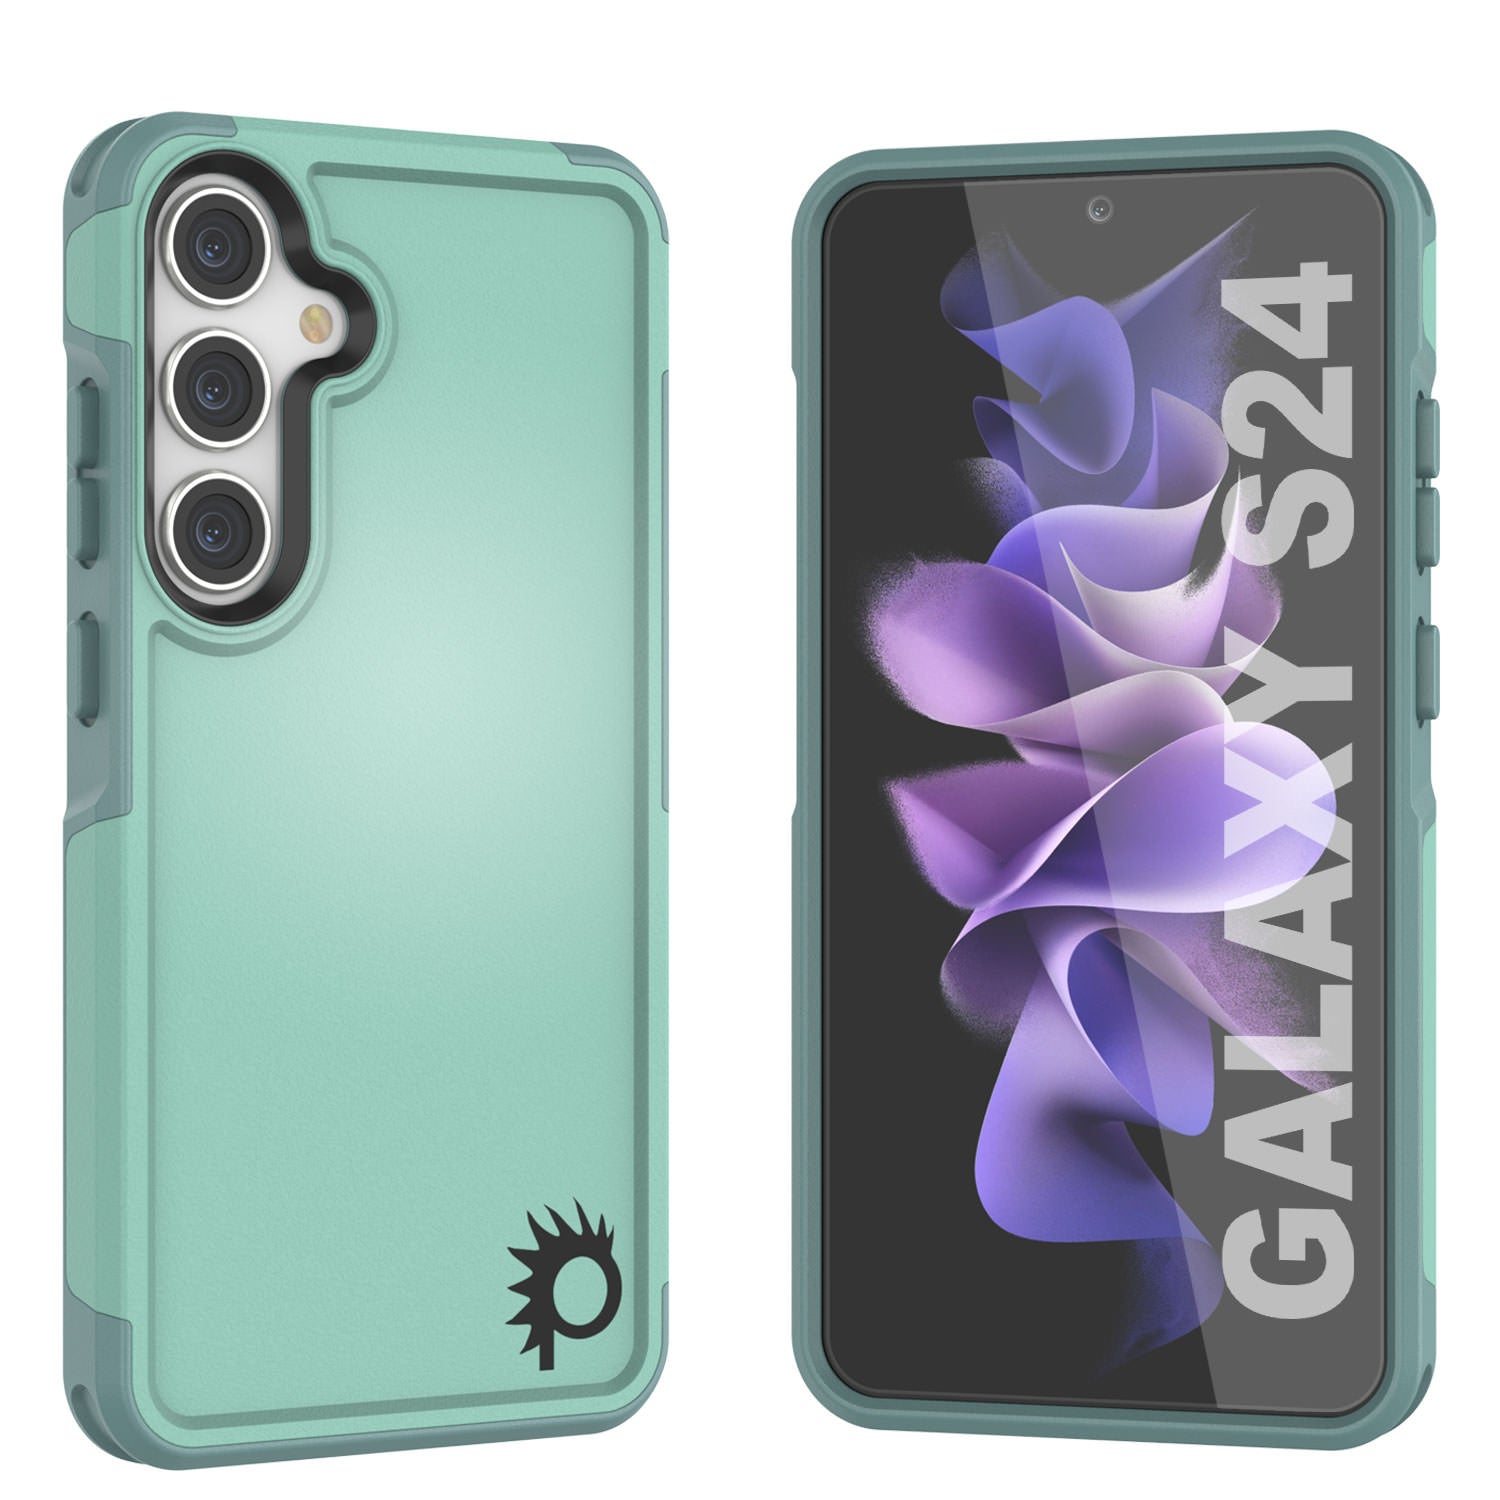 PunkCase Galaxy S24 Case, [Spartan 2.0 Series] Clear Rugged Heavy Duty Cover [Teal]